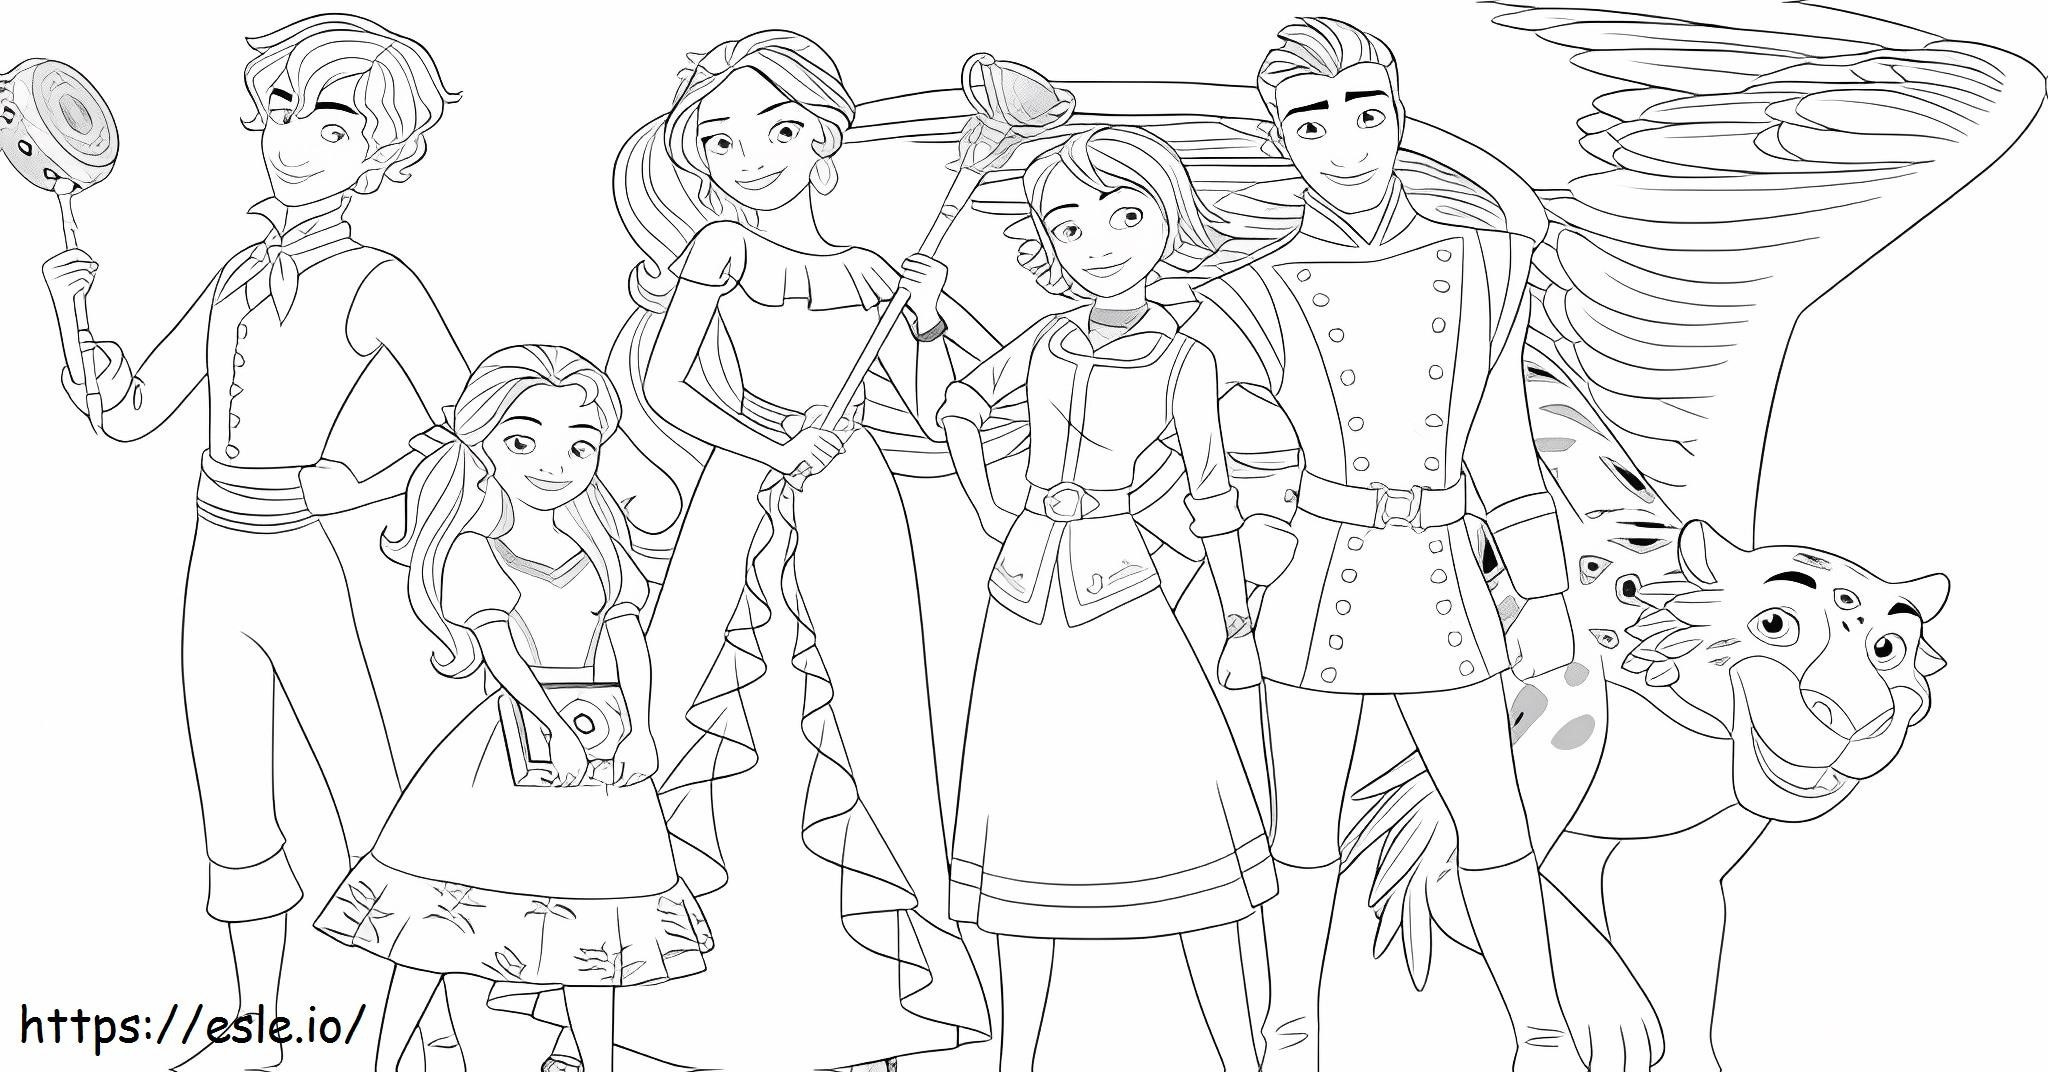 Princess Elena And Friends coloring page